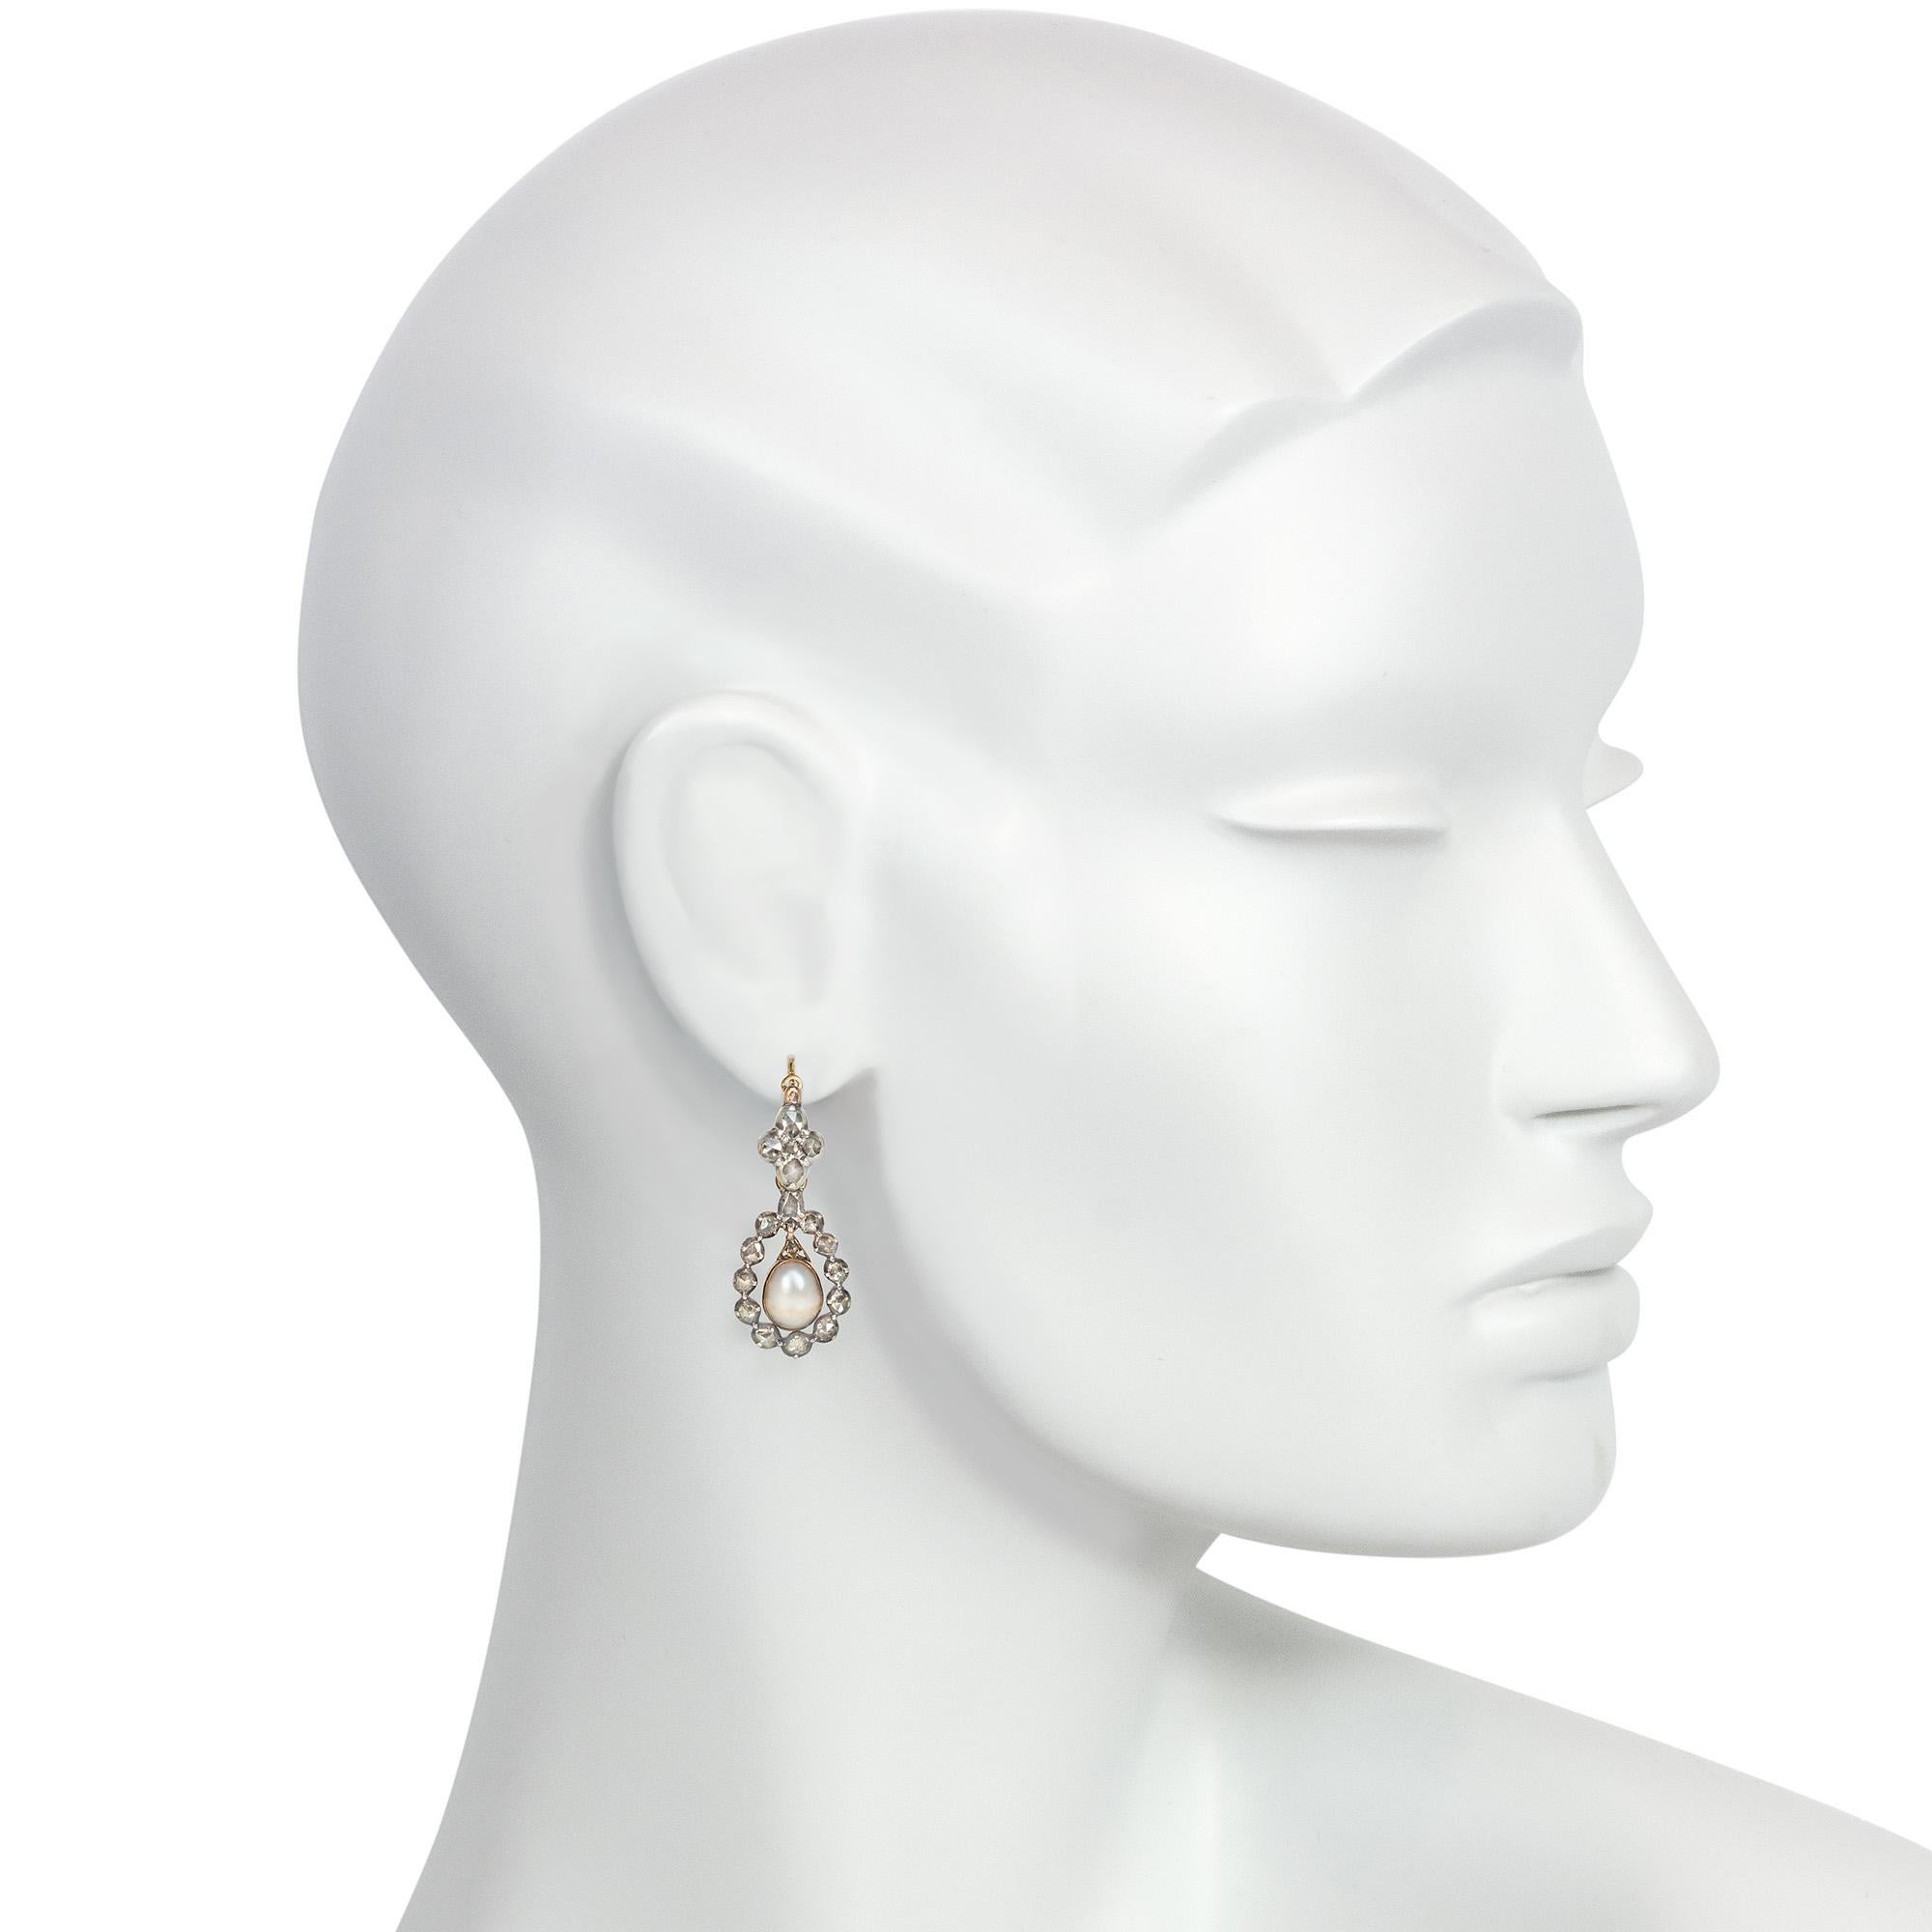 Antique Georgian Rose Diamond and Pearl Pendant Earrings in Silver-Topped Gold In Good Condition For Sale In New York, NY